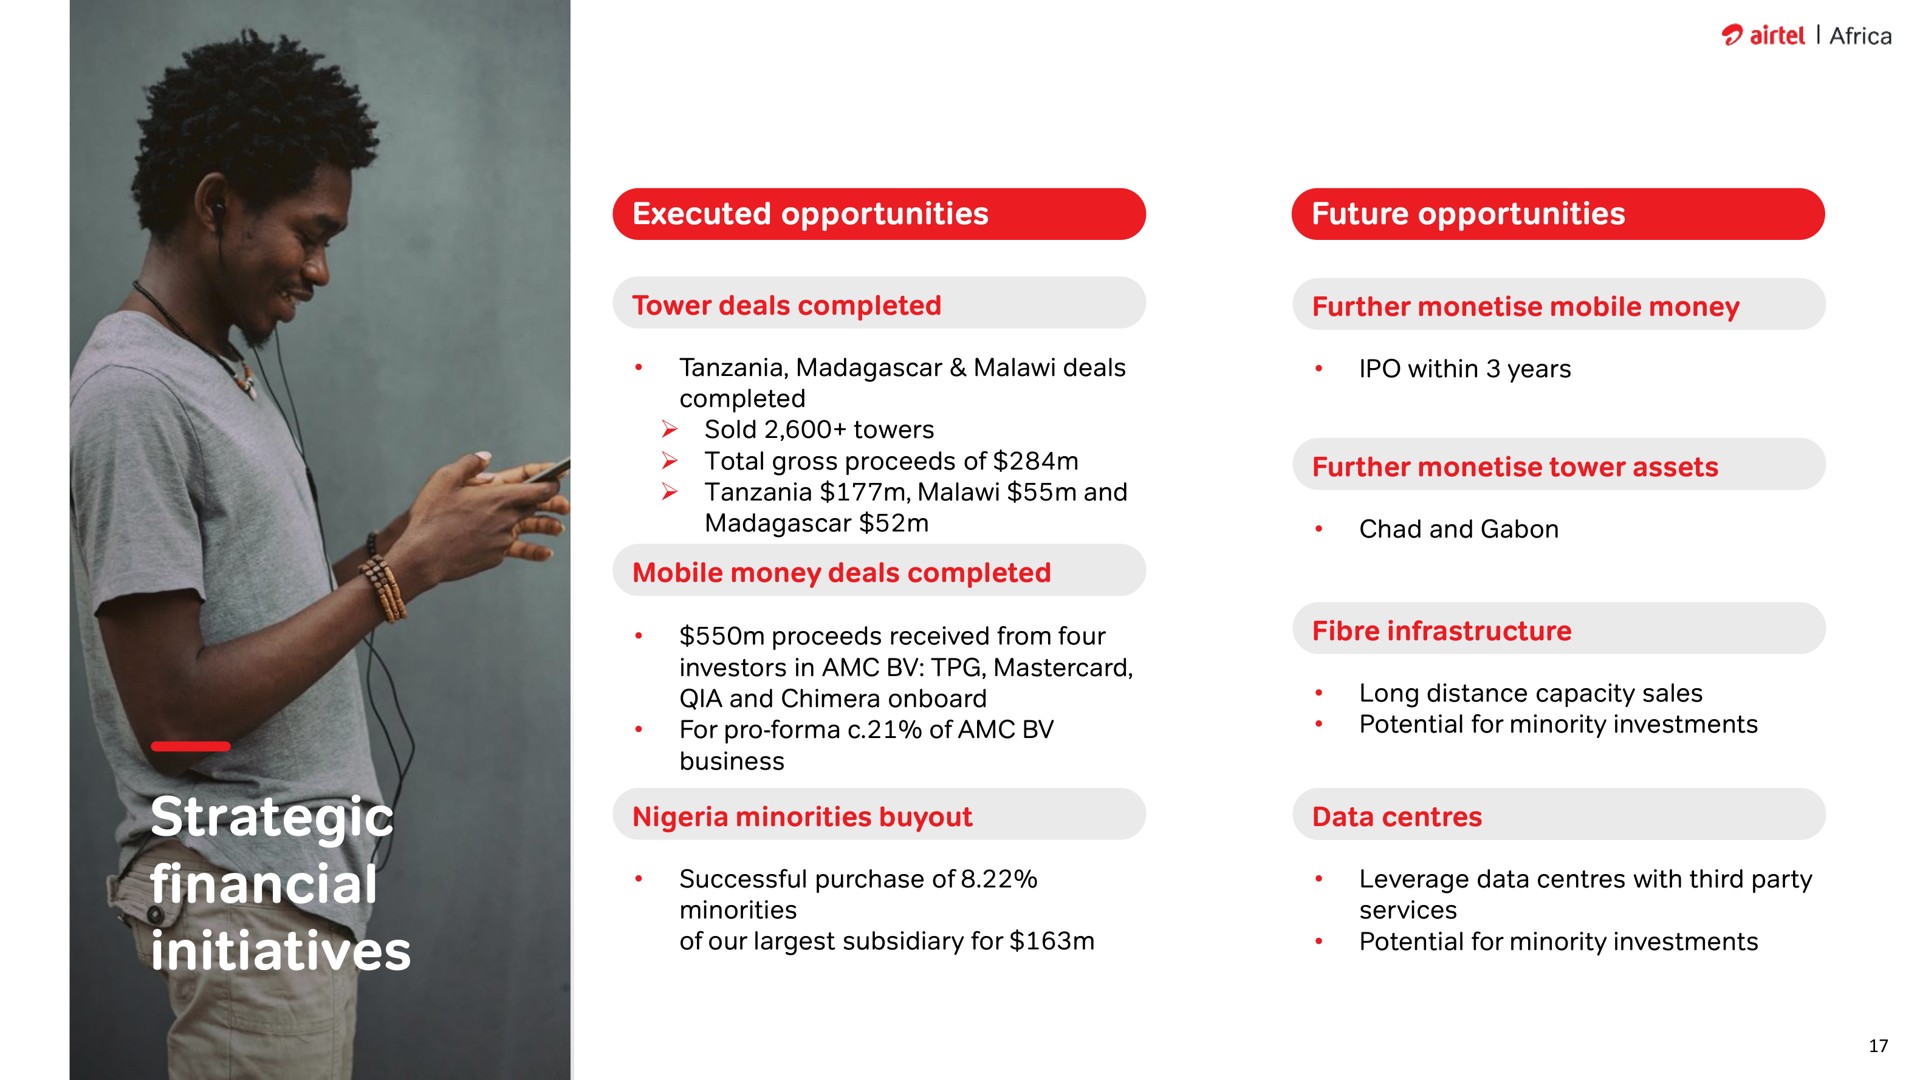 strategic financial initiatives total gross proceeds of further tower assets | Airtel Africa